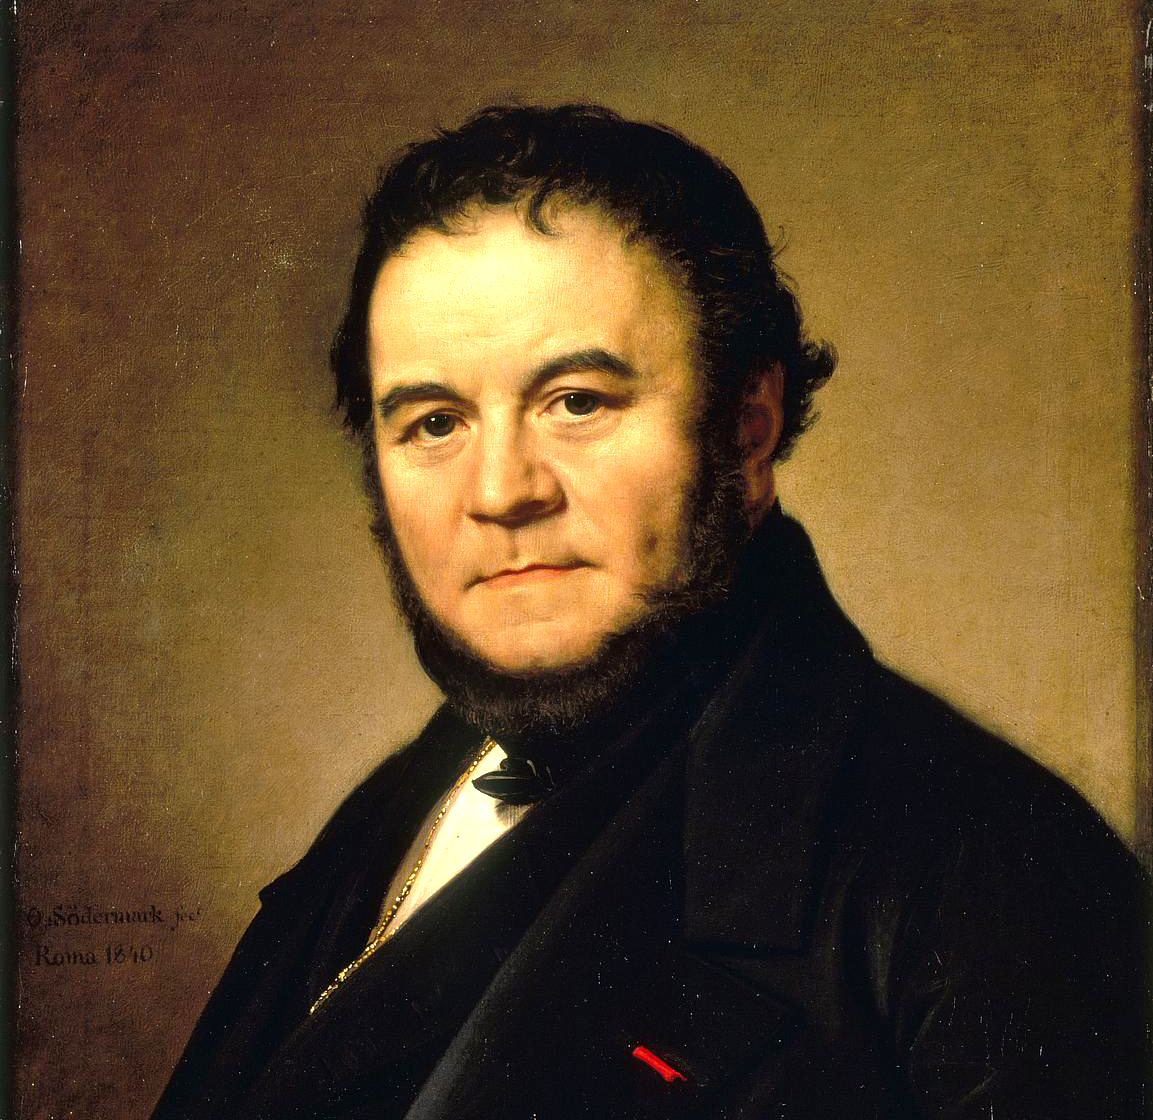 Stendhal stayed in Civitavecchia between 1831 and 1836